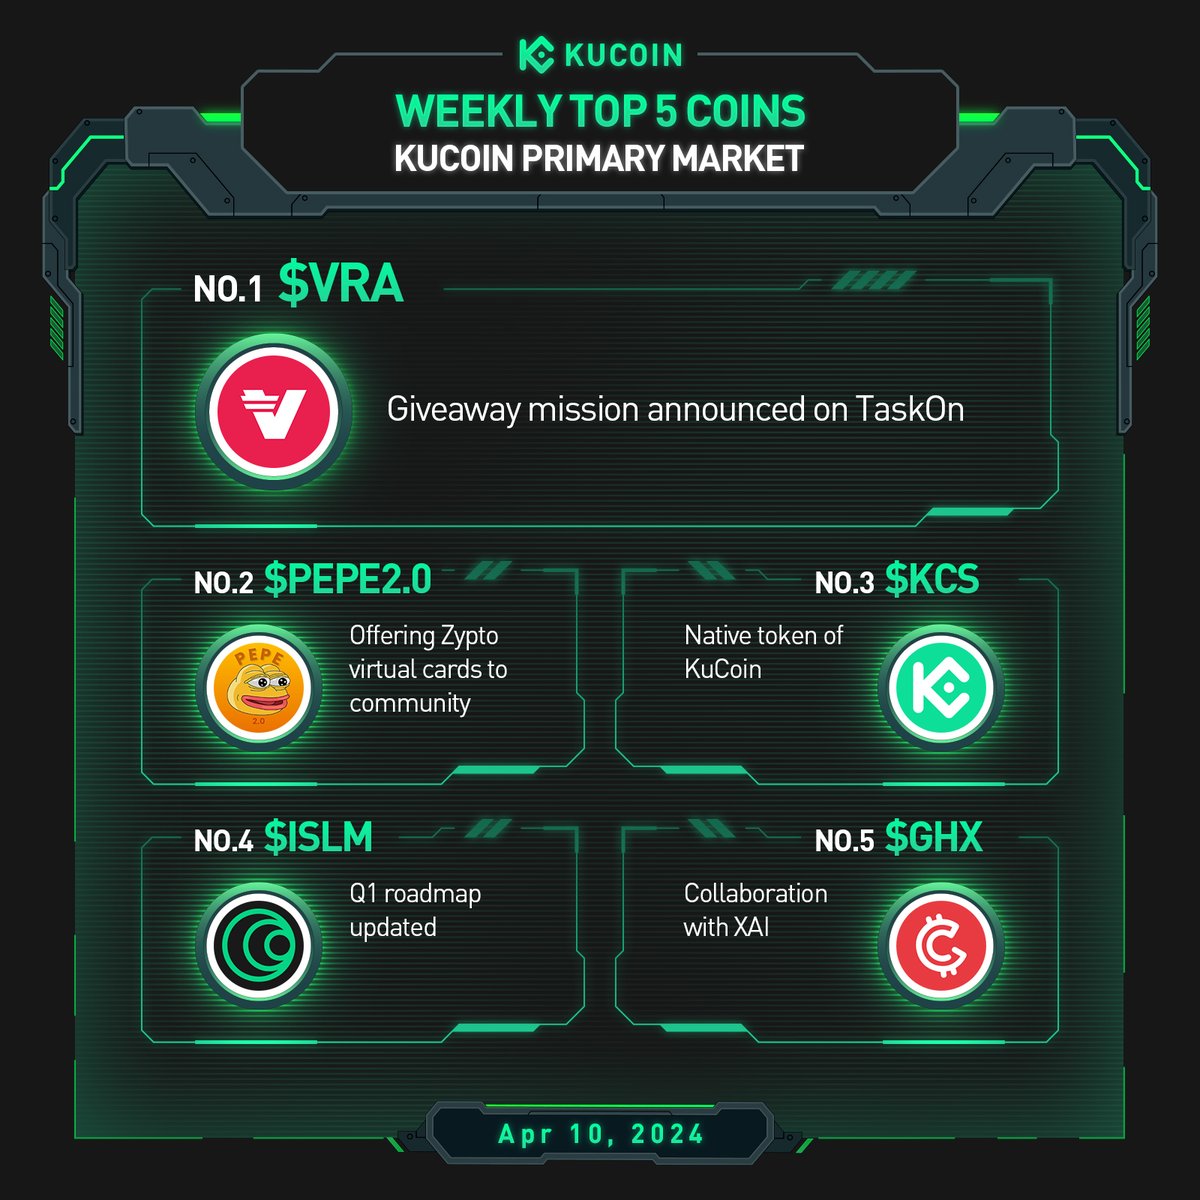 Explore the Weekly Top 5 Coins with #KuCoin as Primary Market (April 10, 2024) ⤵️ 🔥 $VRA 🔥 #PEPE2 🔥 $KCS 🔥 $ISLM 🔥 $GHX Discover the #KuCoinGems!💎